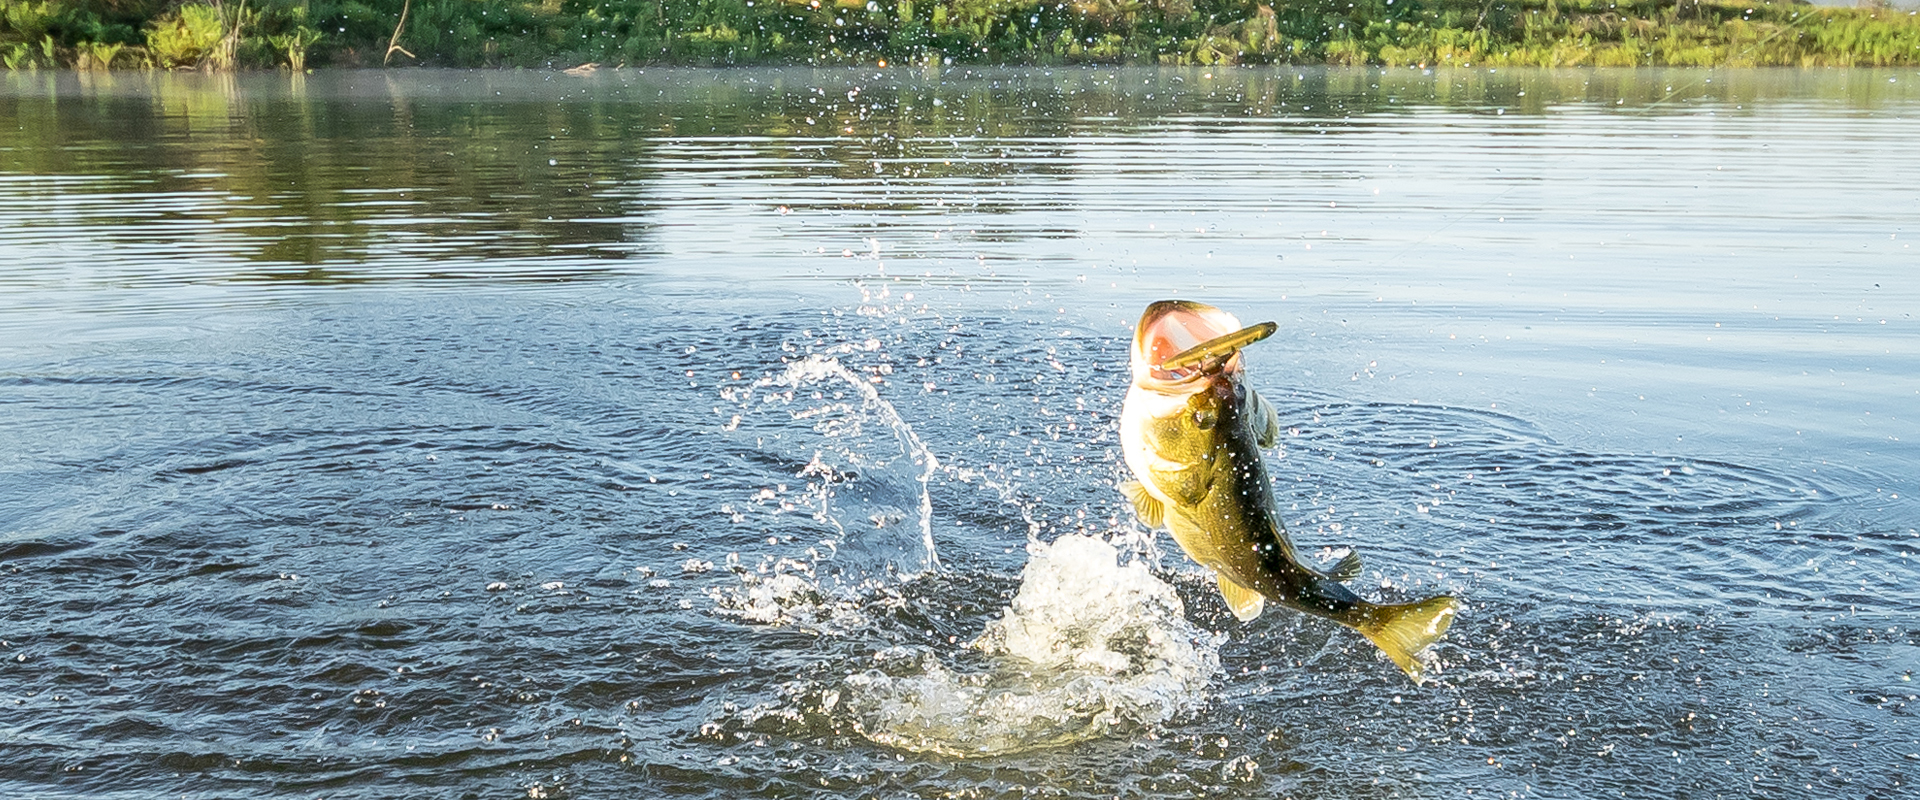 largemouth bass jumping for bait